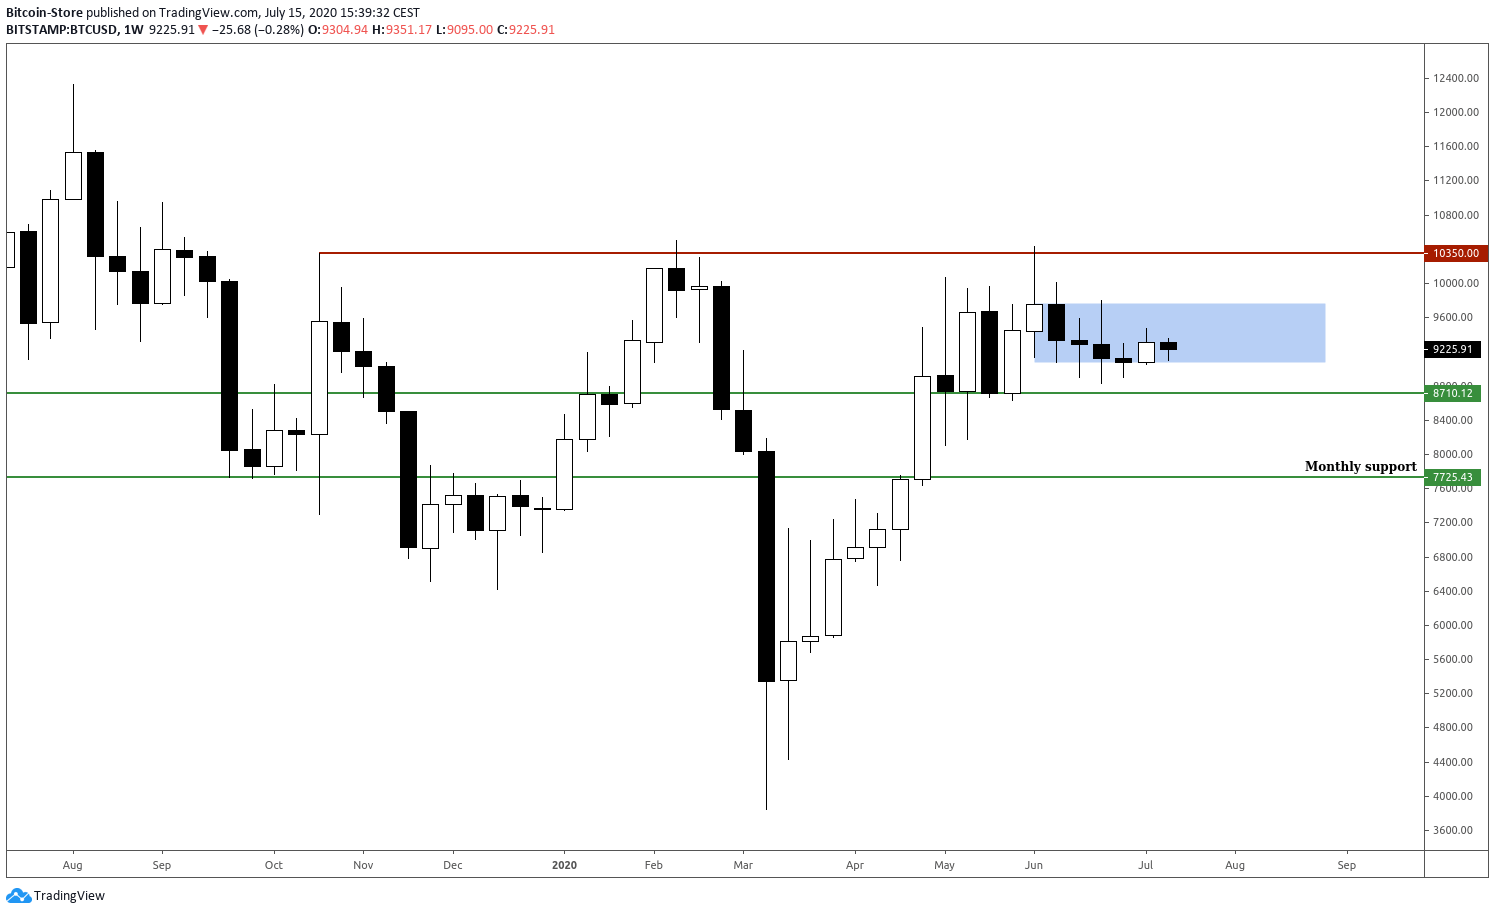 The candle chart showing the movement of Bitcoin over time.